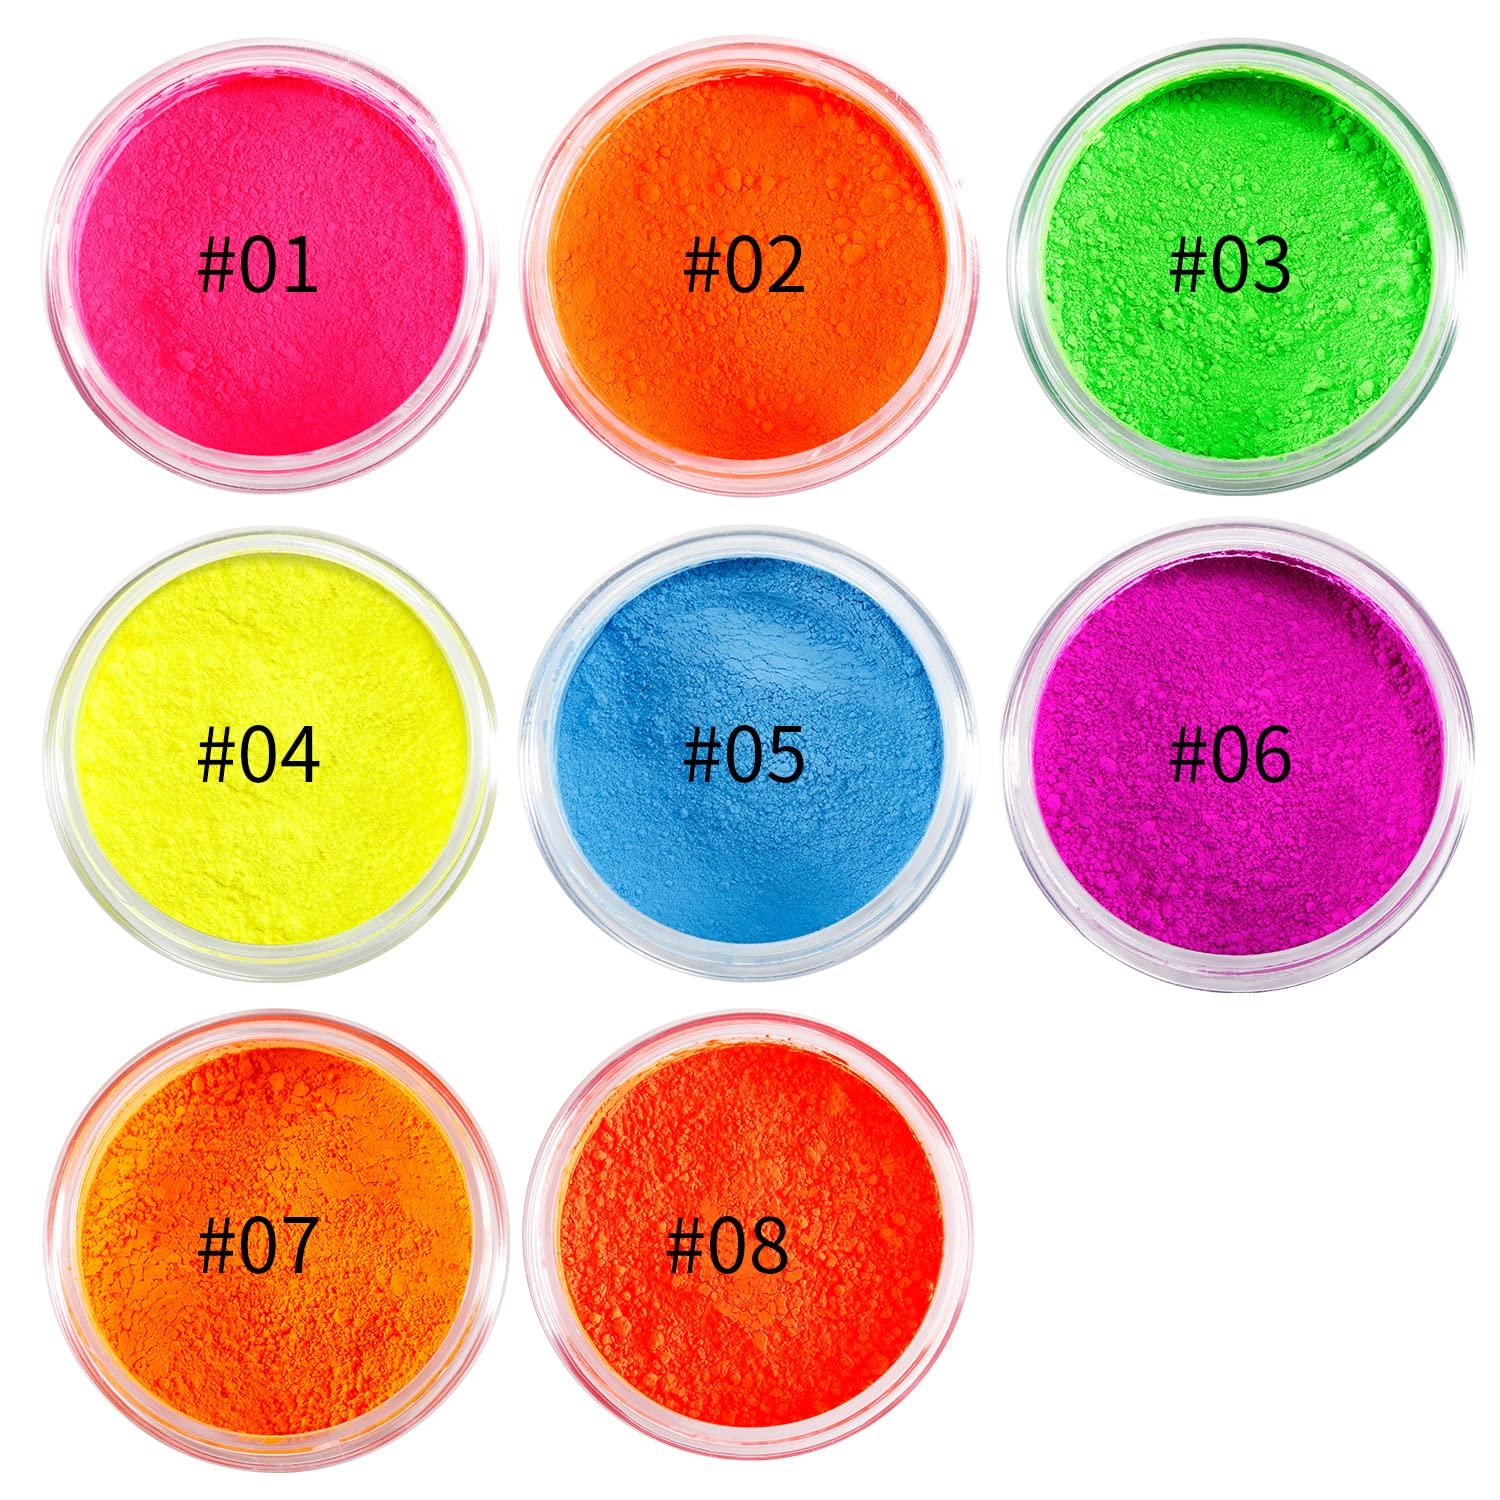 Ultra Violet Glow 3 Grams Set of 8 Colors or Single Colors Fluorescent  Glowing on UV Light Neon Mica Powder Dust Art & Crafts Supply 